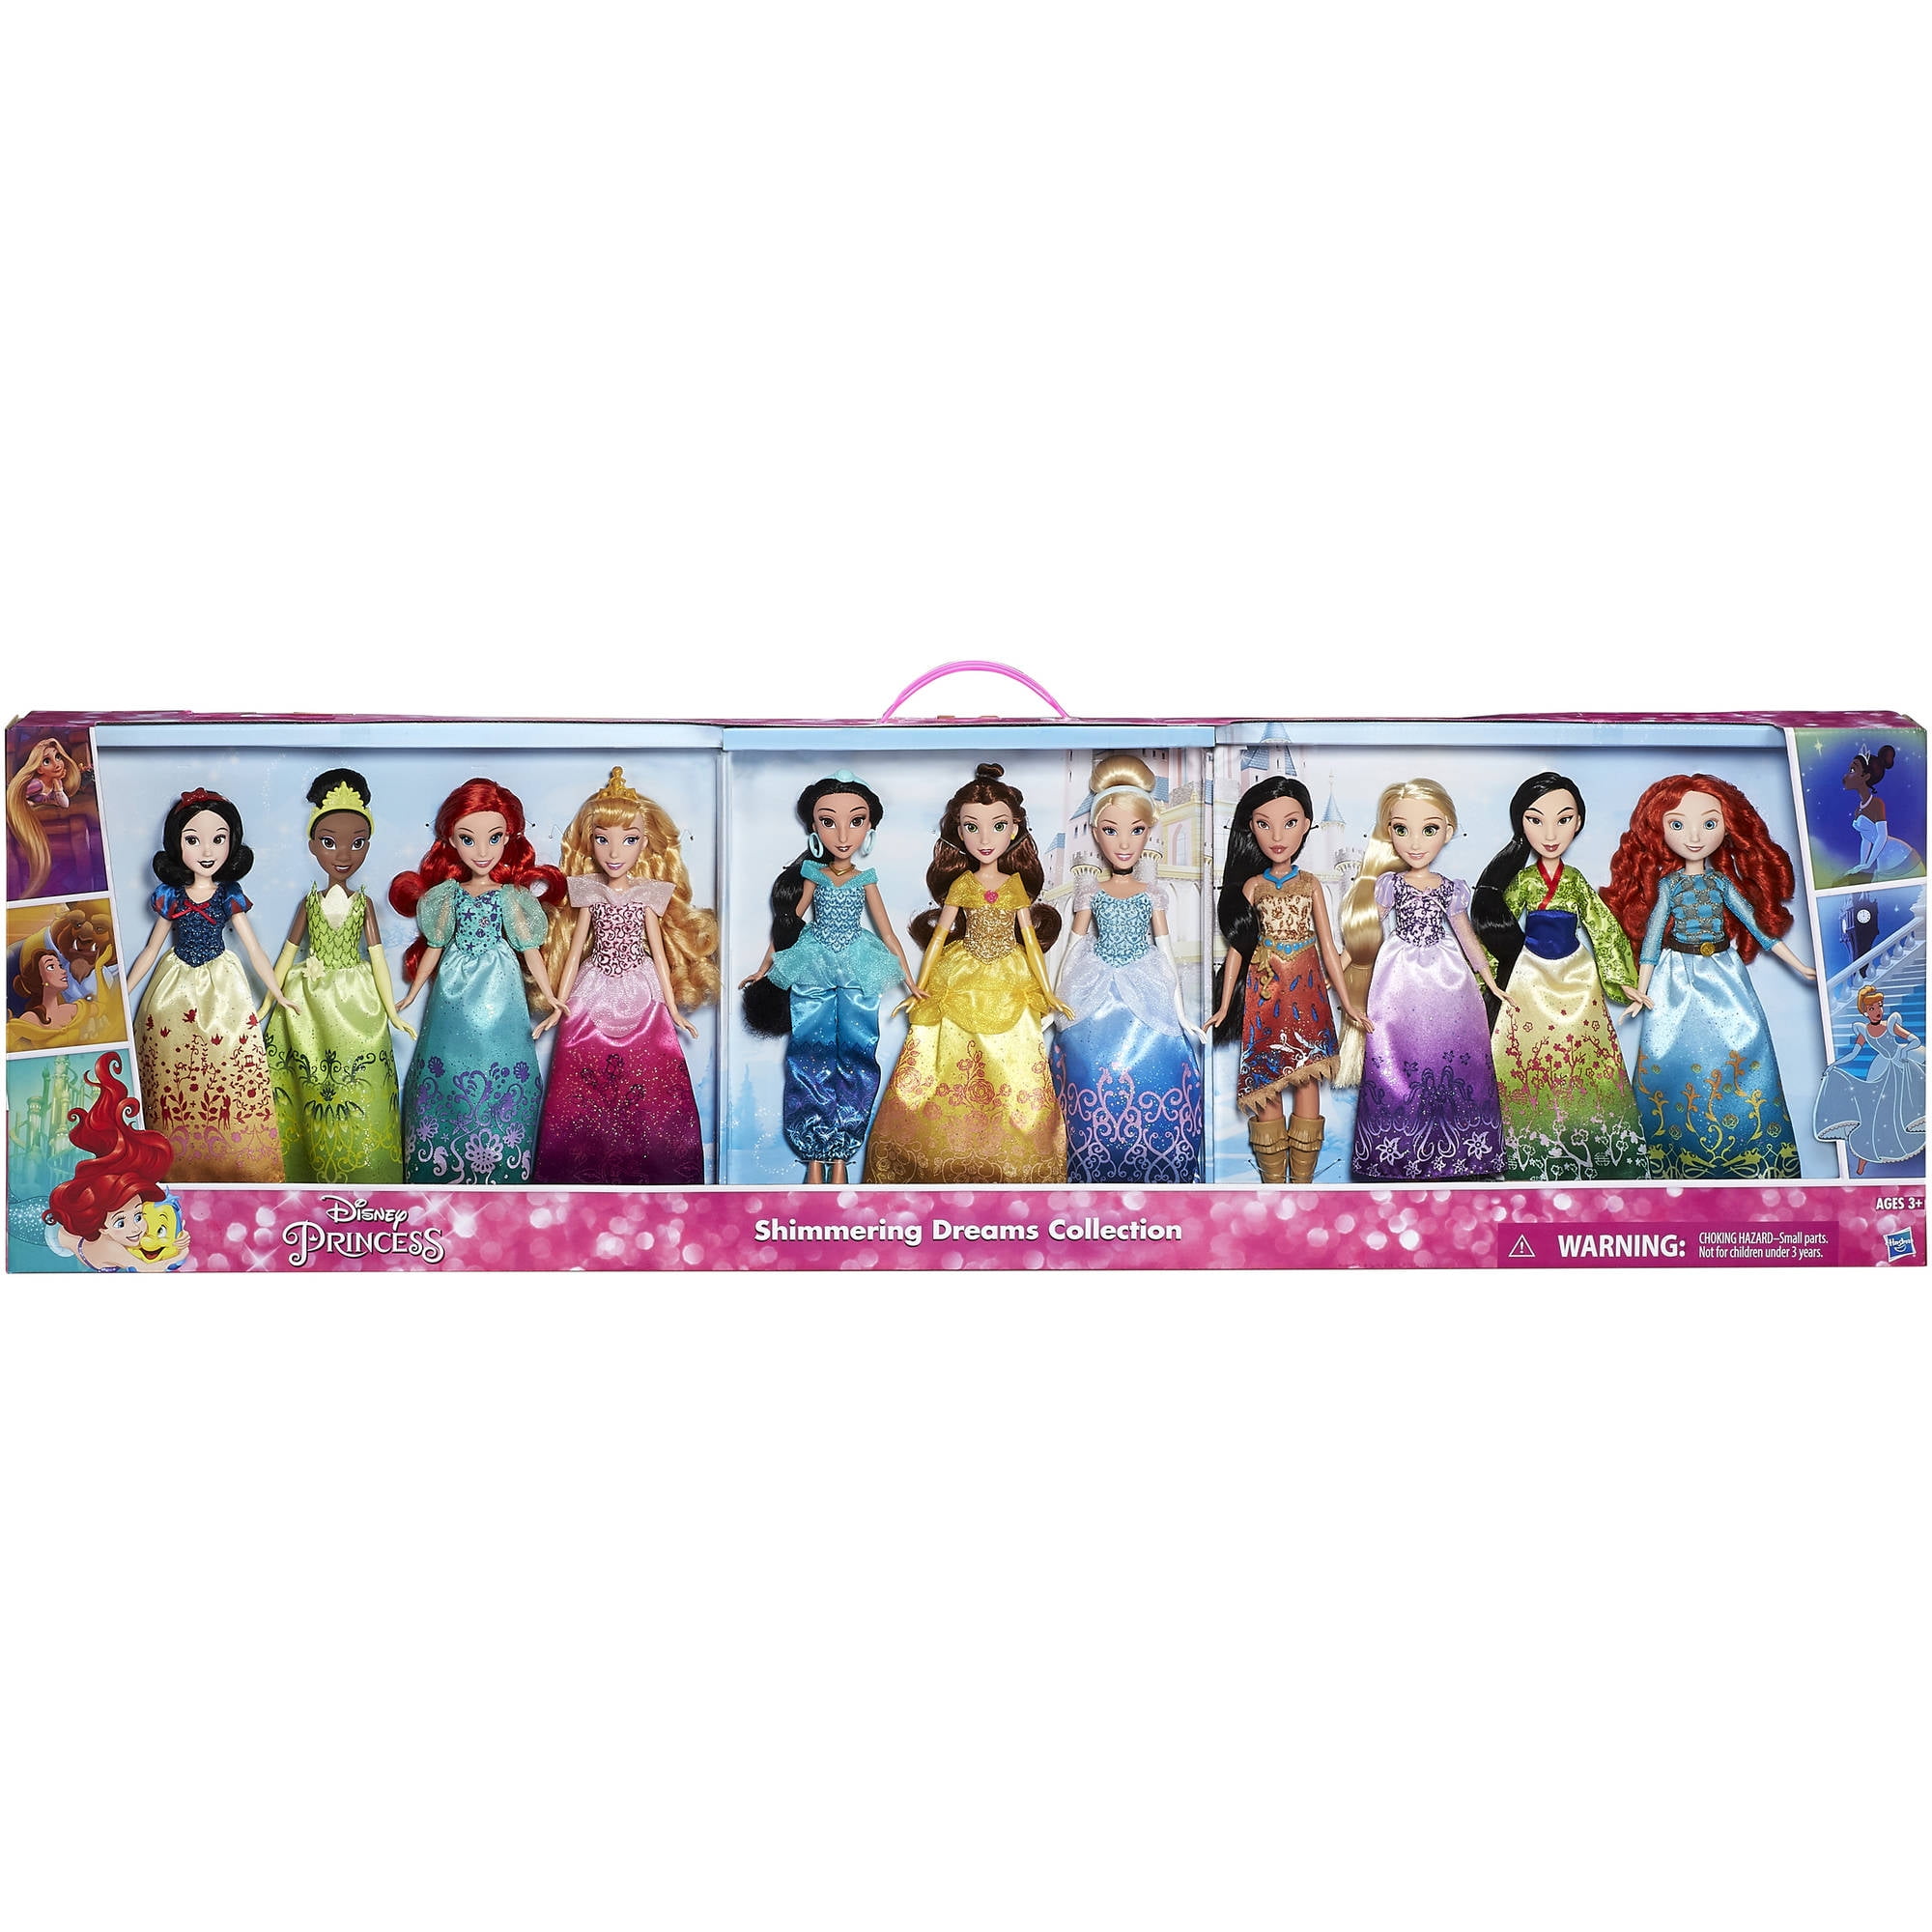 New Disney Princess Shimmering Dreams Collection Girls Dolls 11 Pack Play Set